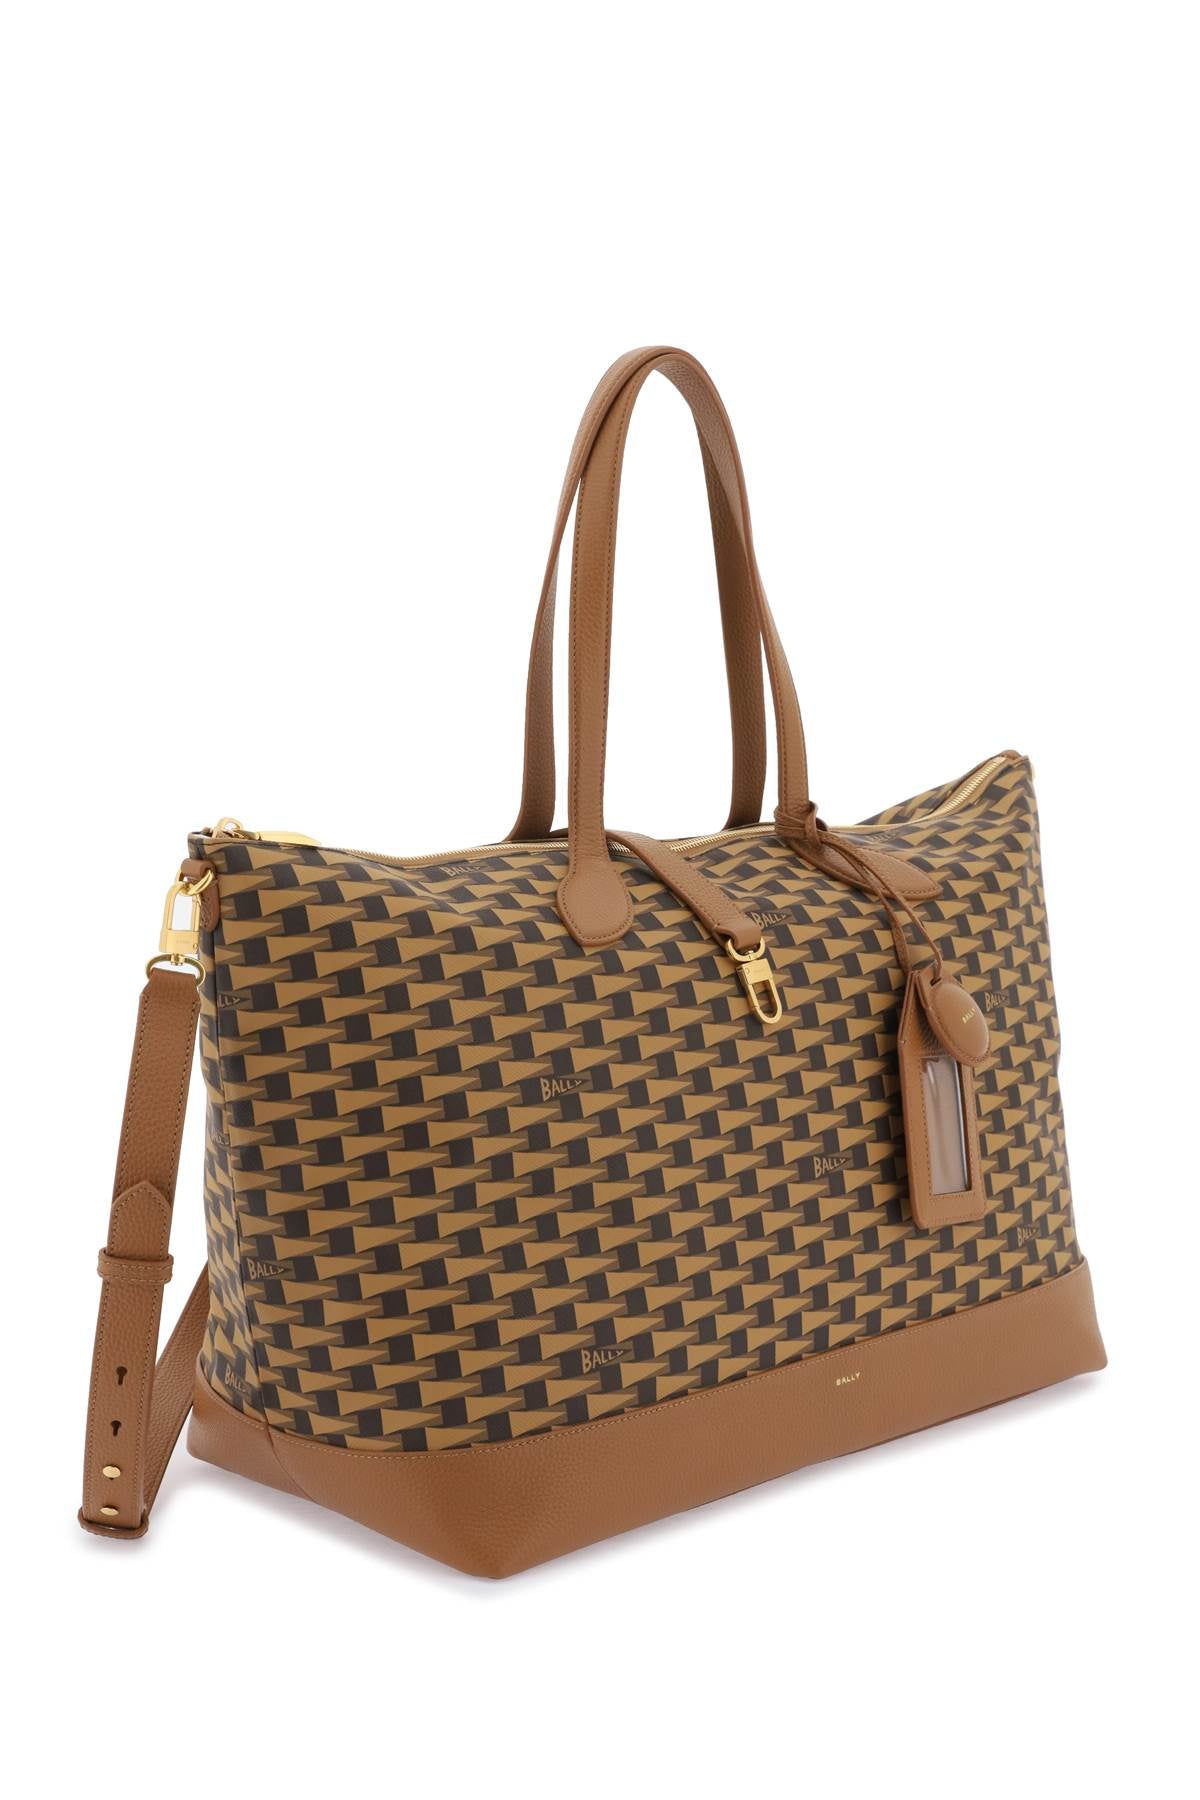 BALLY Iconic Shoulder Tote Bag for Women in Coated Canvas with Removable Leather Strap and Gold Hardware